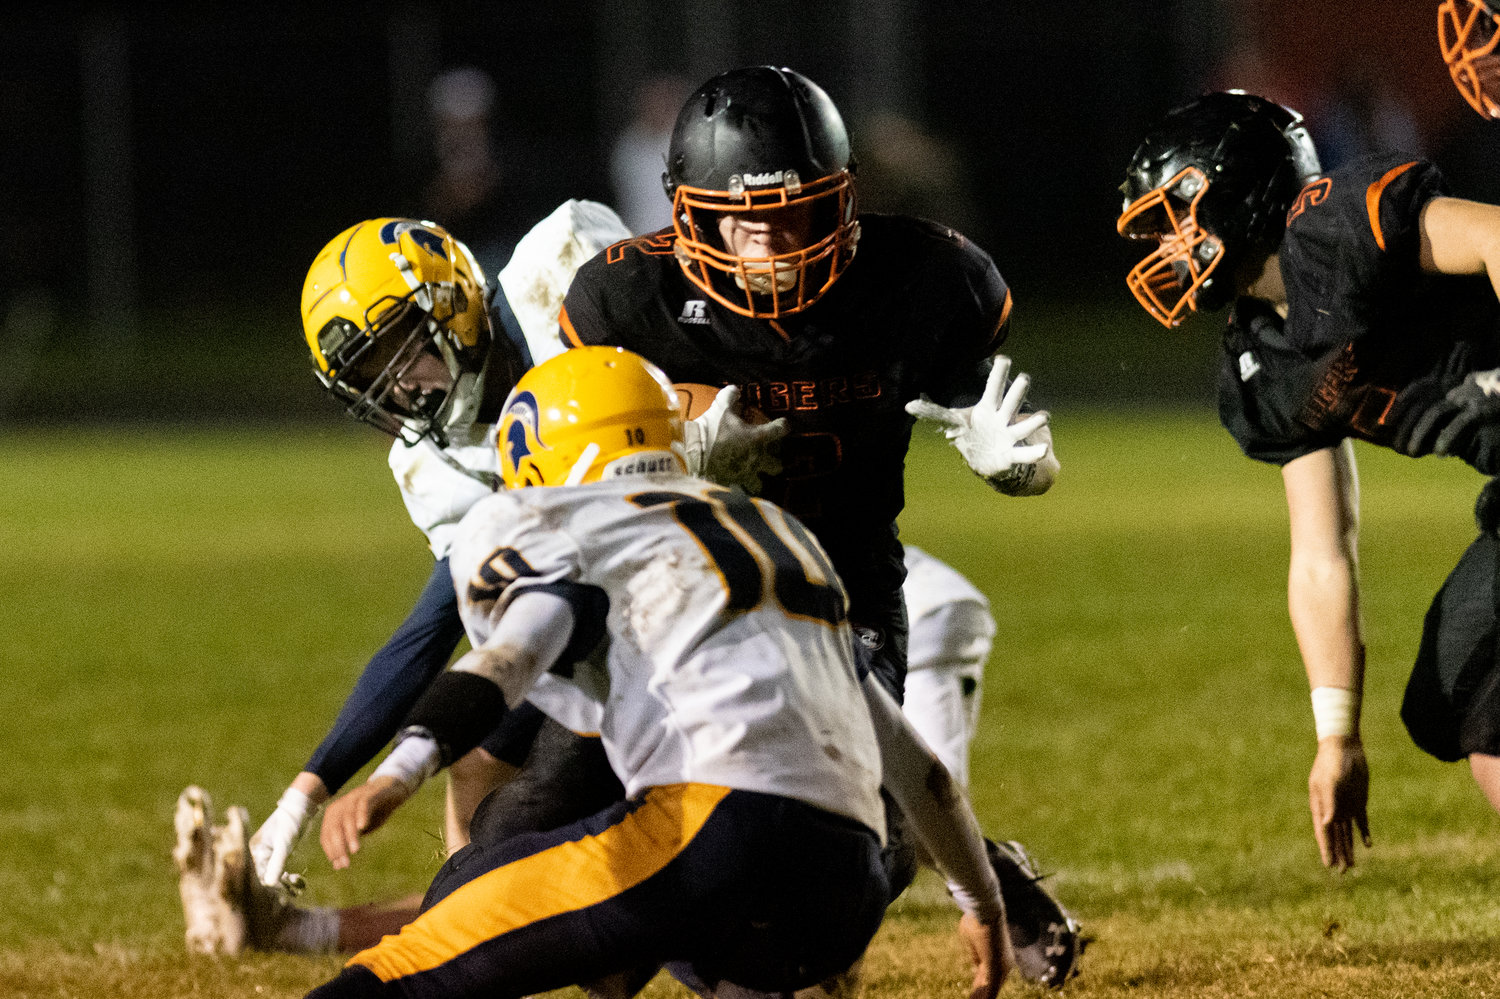 Napavine tailback Cael Stanley tries to elude a Forks defender Oct. 22.